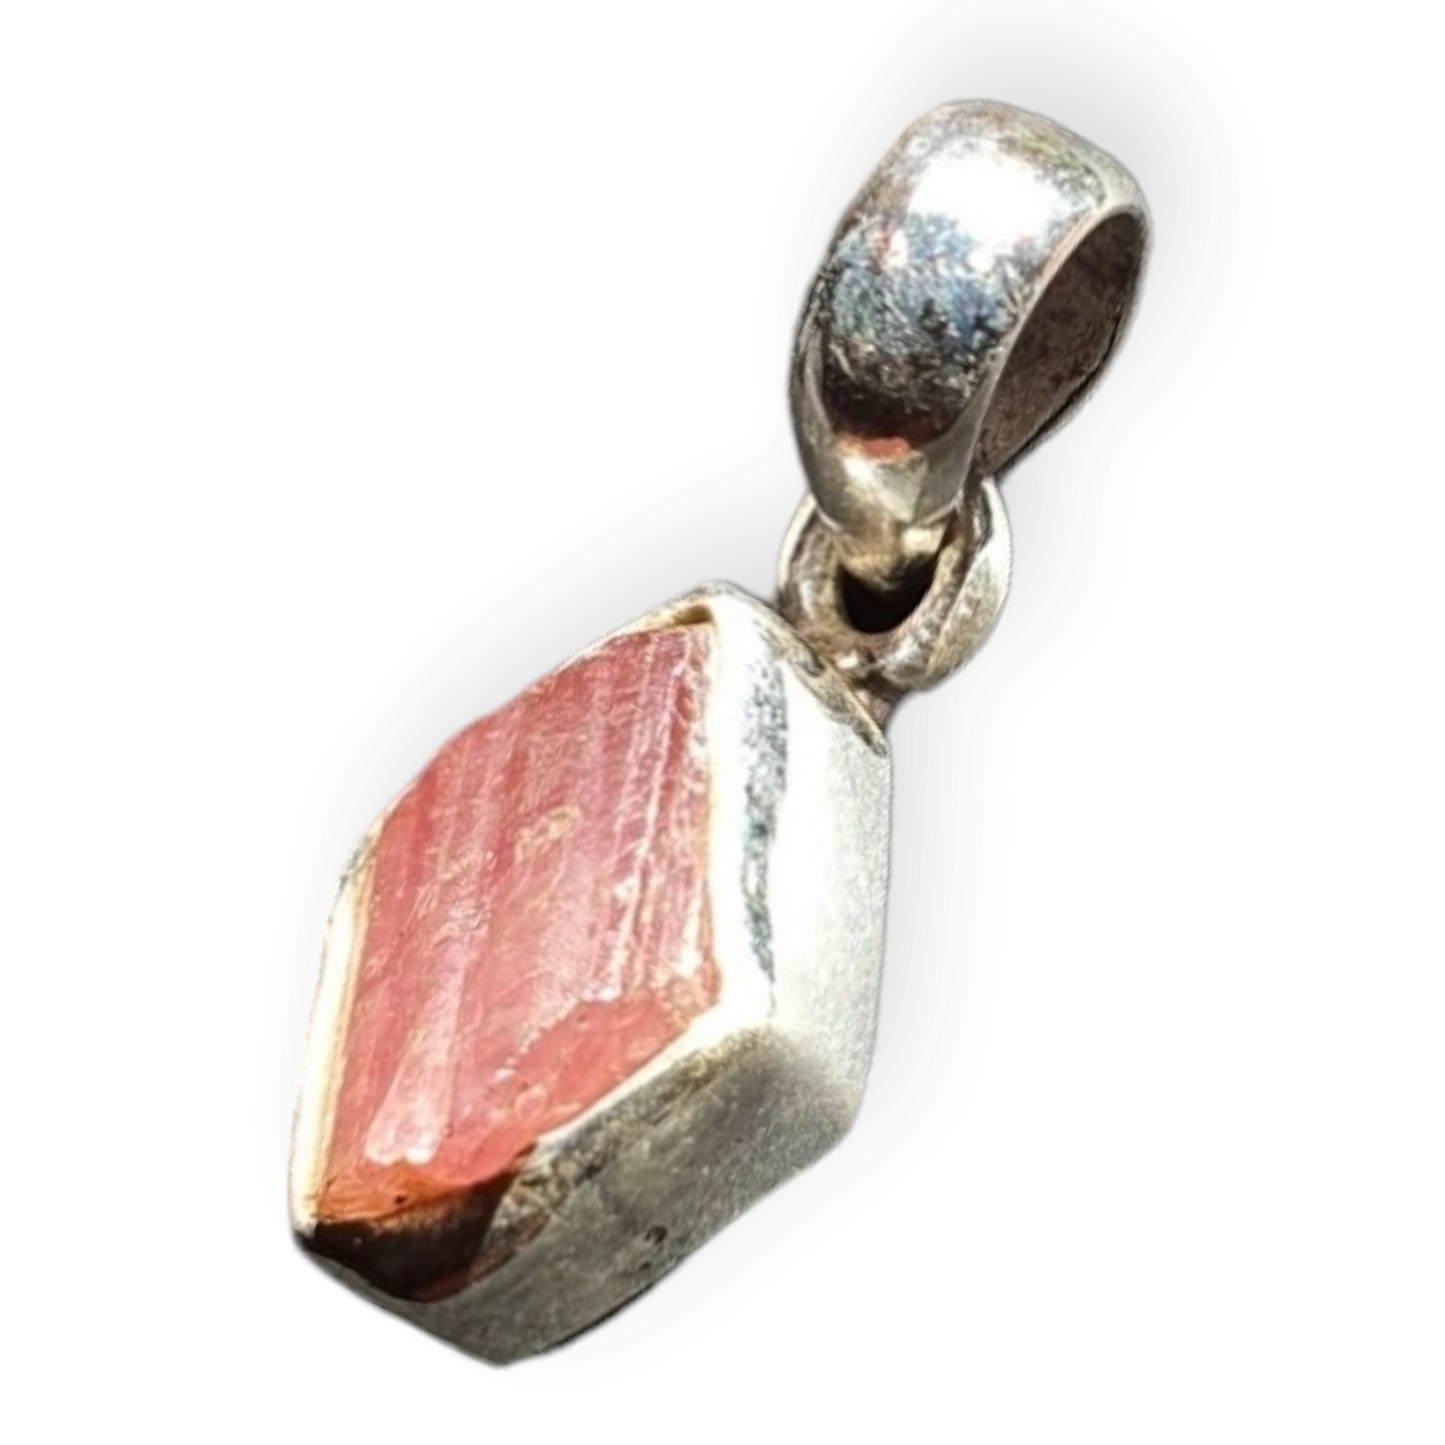 Crystals - Pink Tourmaline Pendant - Sterling Silver